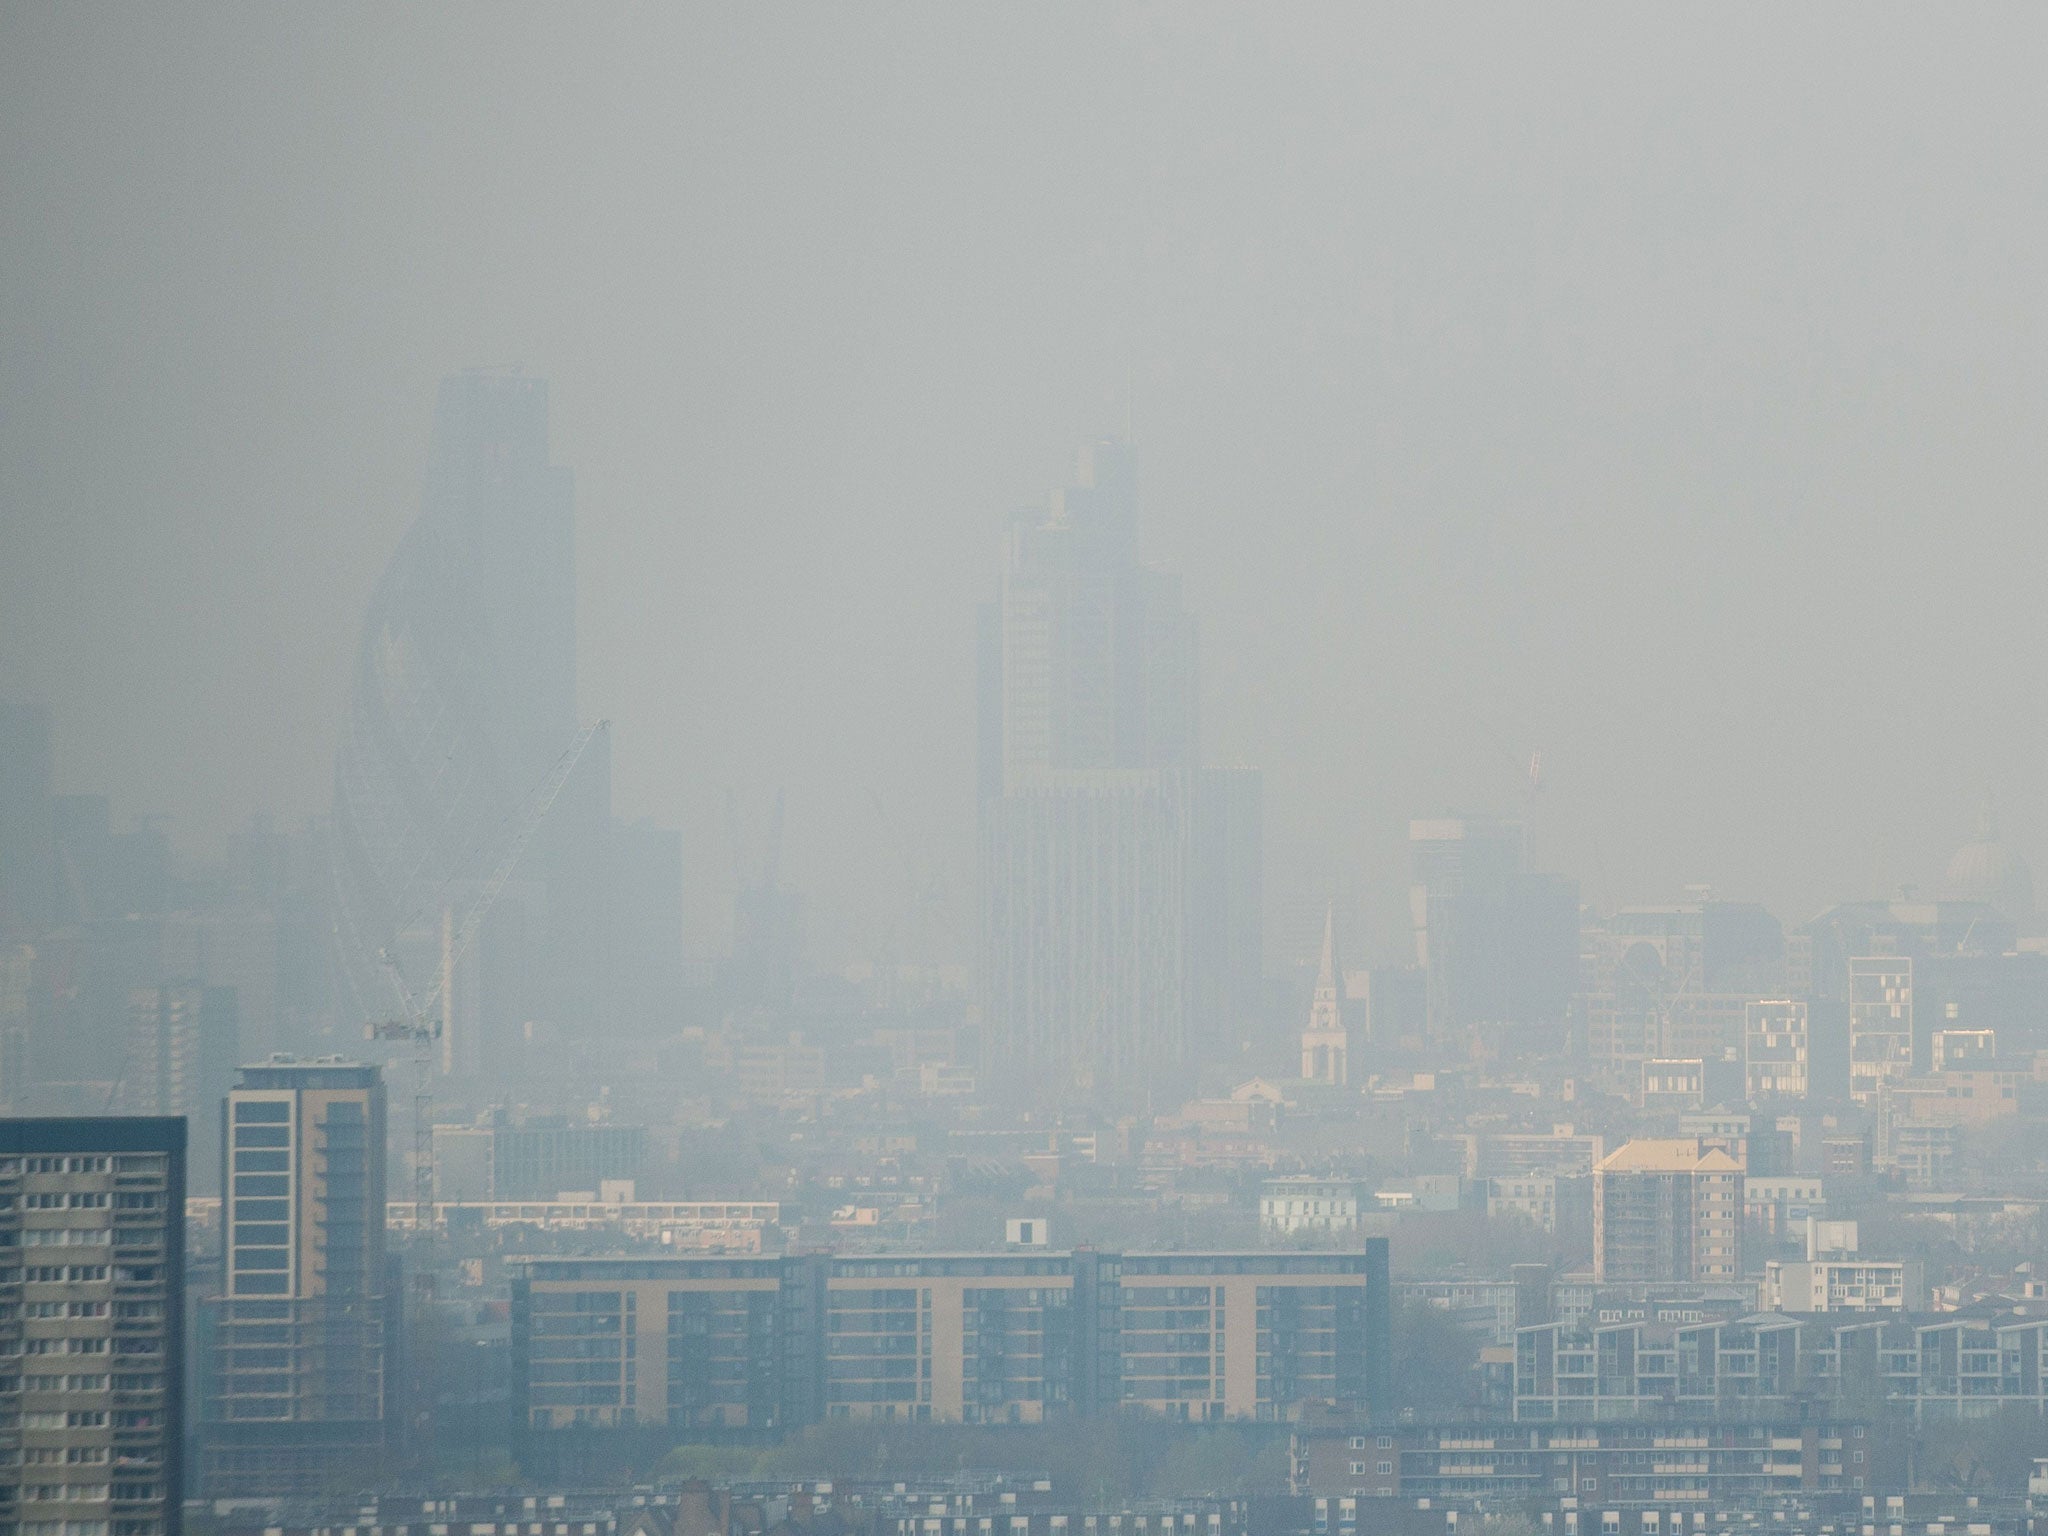 Air pollution hangs in the air lowering visibility towards central London and the City from east London